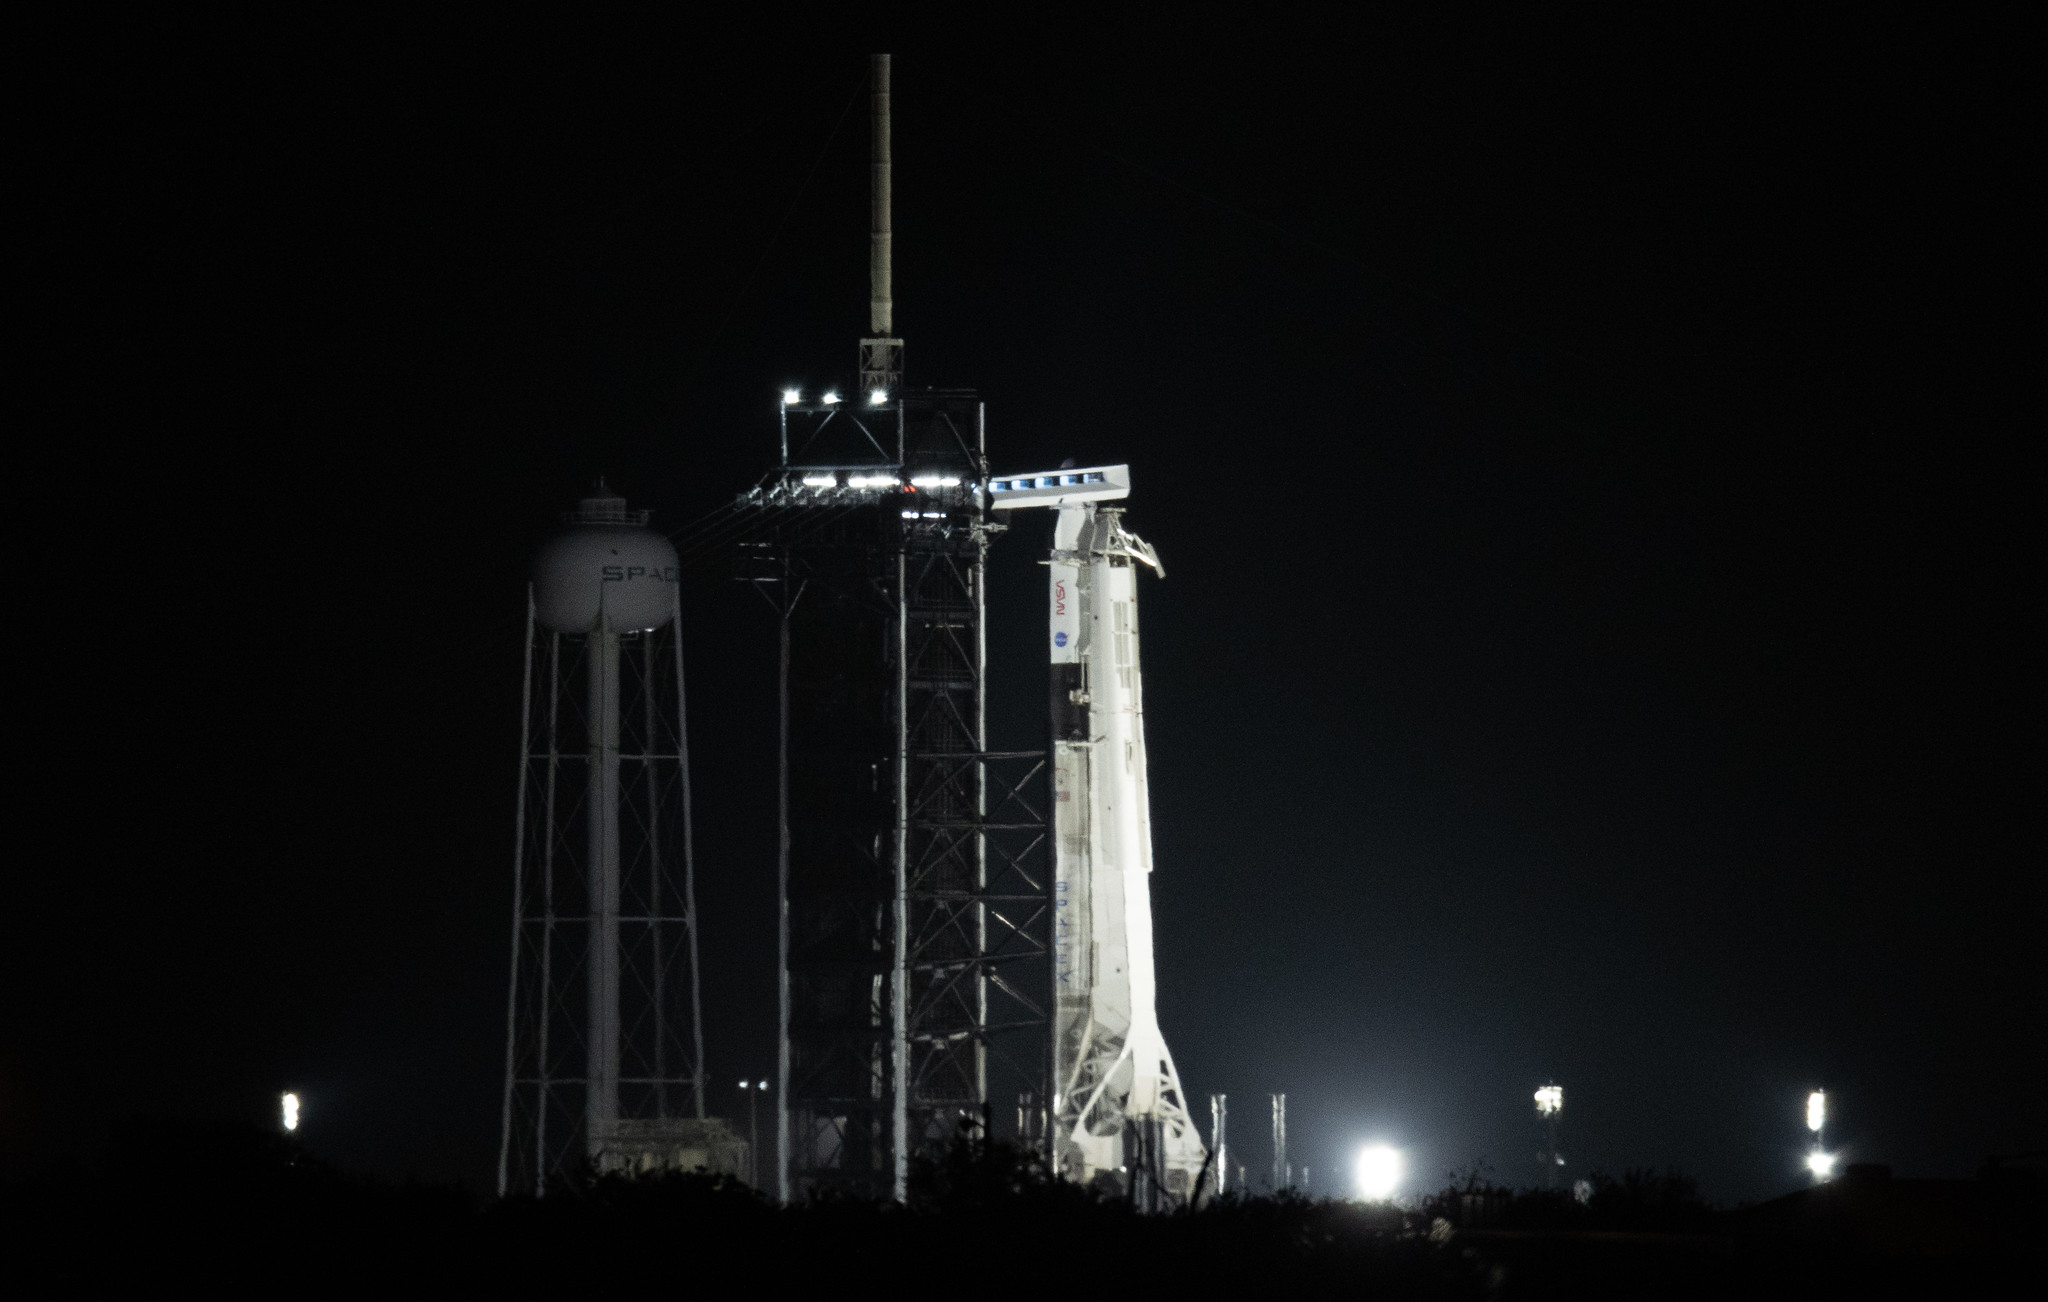 A SpaceX Falcon 9 rocket with the company's Crew Dragon spacecraft onboard is seen illuminated by spotlights on the launch pad at Launch Complex 39A as the countdown continues for the launch of the Crew-2 mission, Friday, April 23, 2021, at NASA’s Kennedy Space Center in Florida.